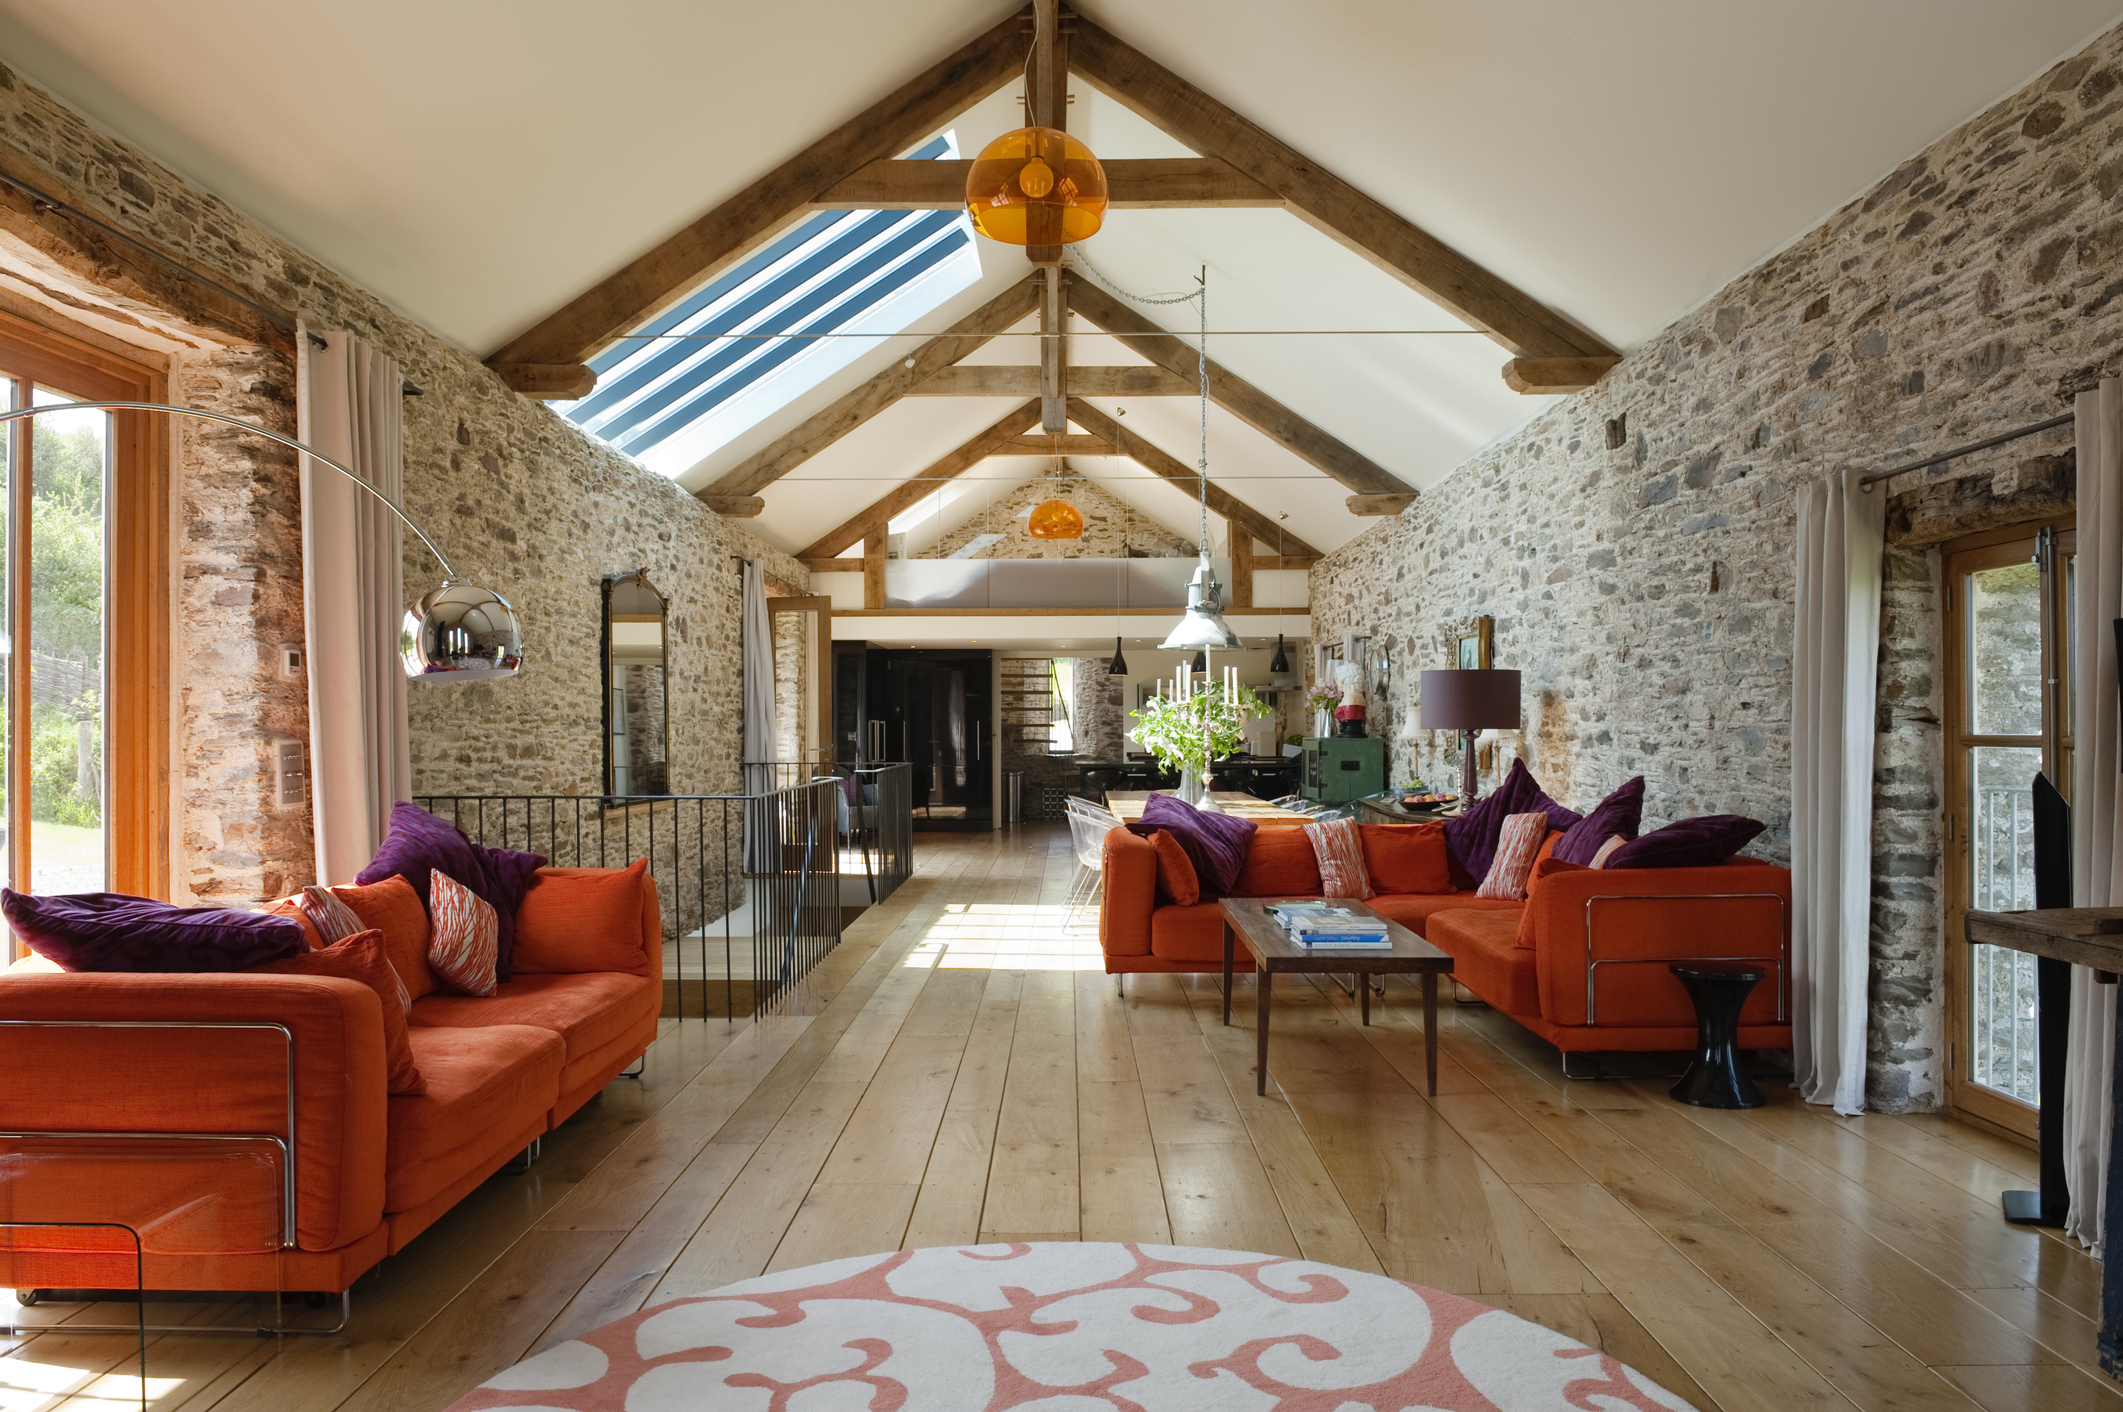 The long interior of a home converted from a European barn is finished with hardwood and furnished with red sofas.